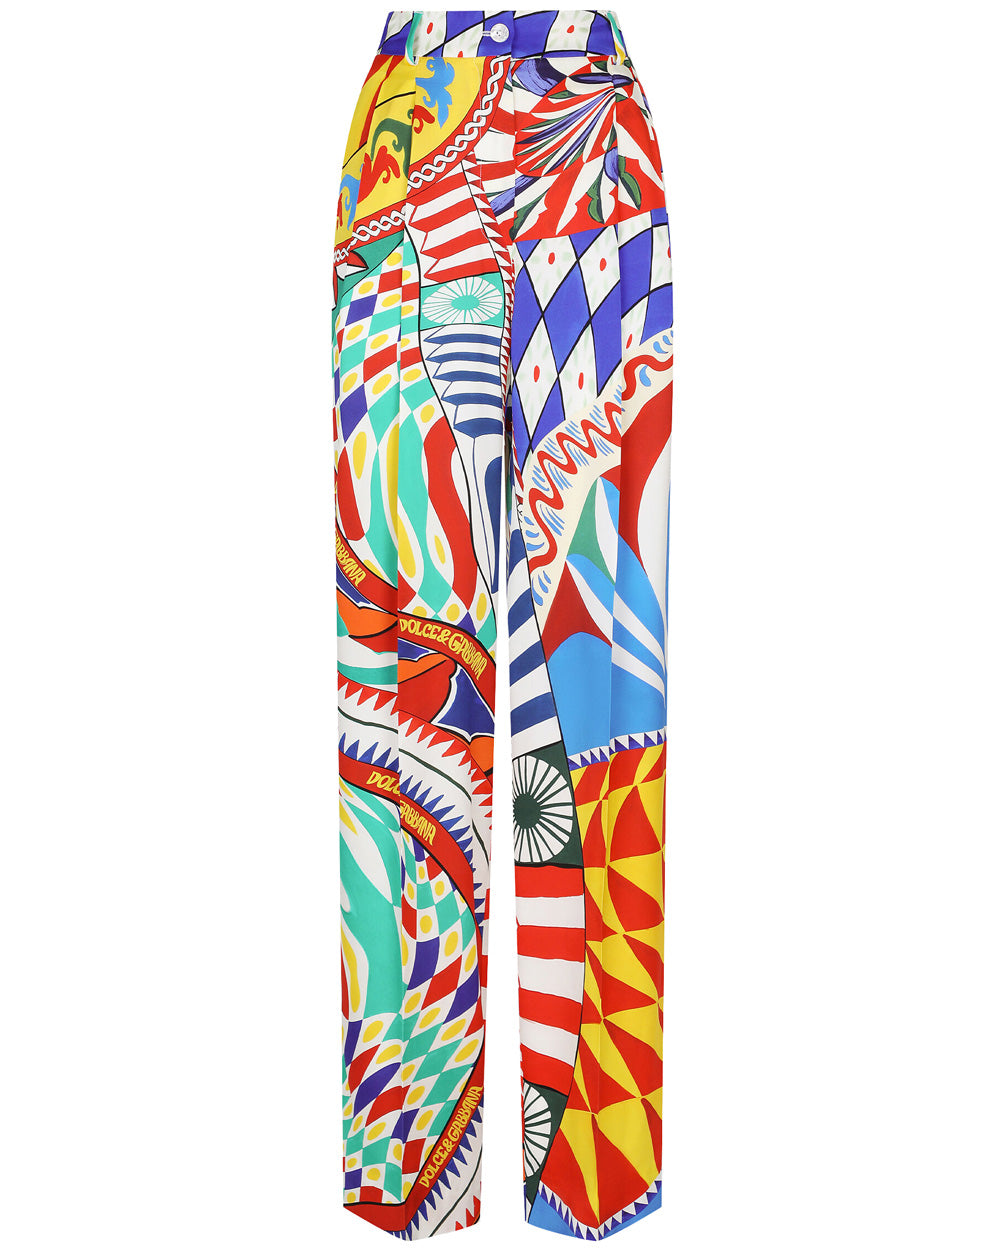 Dolce & Gabbana Carretto Card Psychedelic Pant – Stanley Korshak